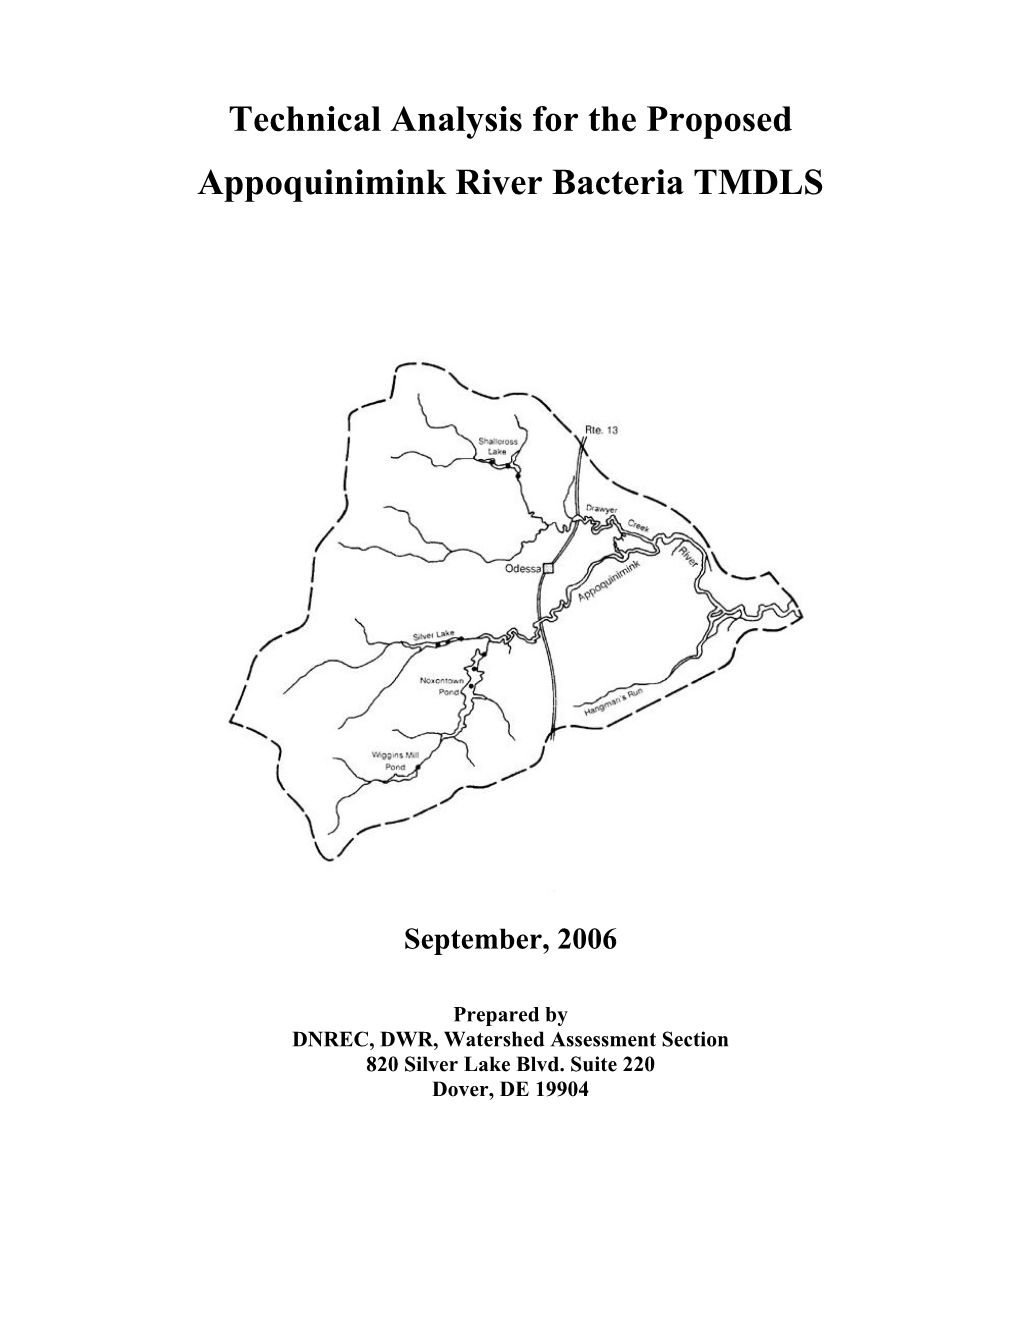 Technical Analysis for the Proposed Appoquinimink River Bacteria TMDLS